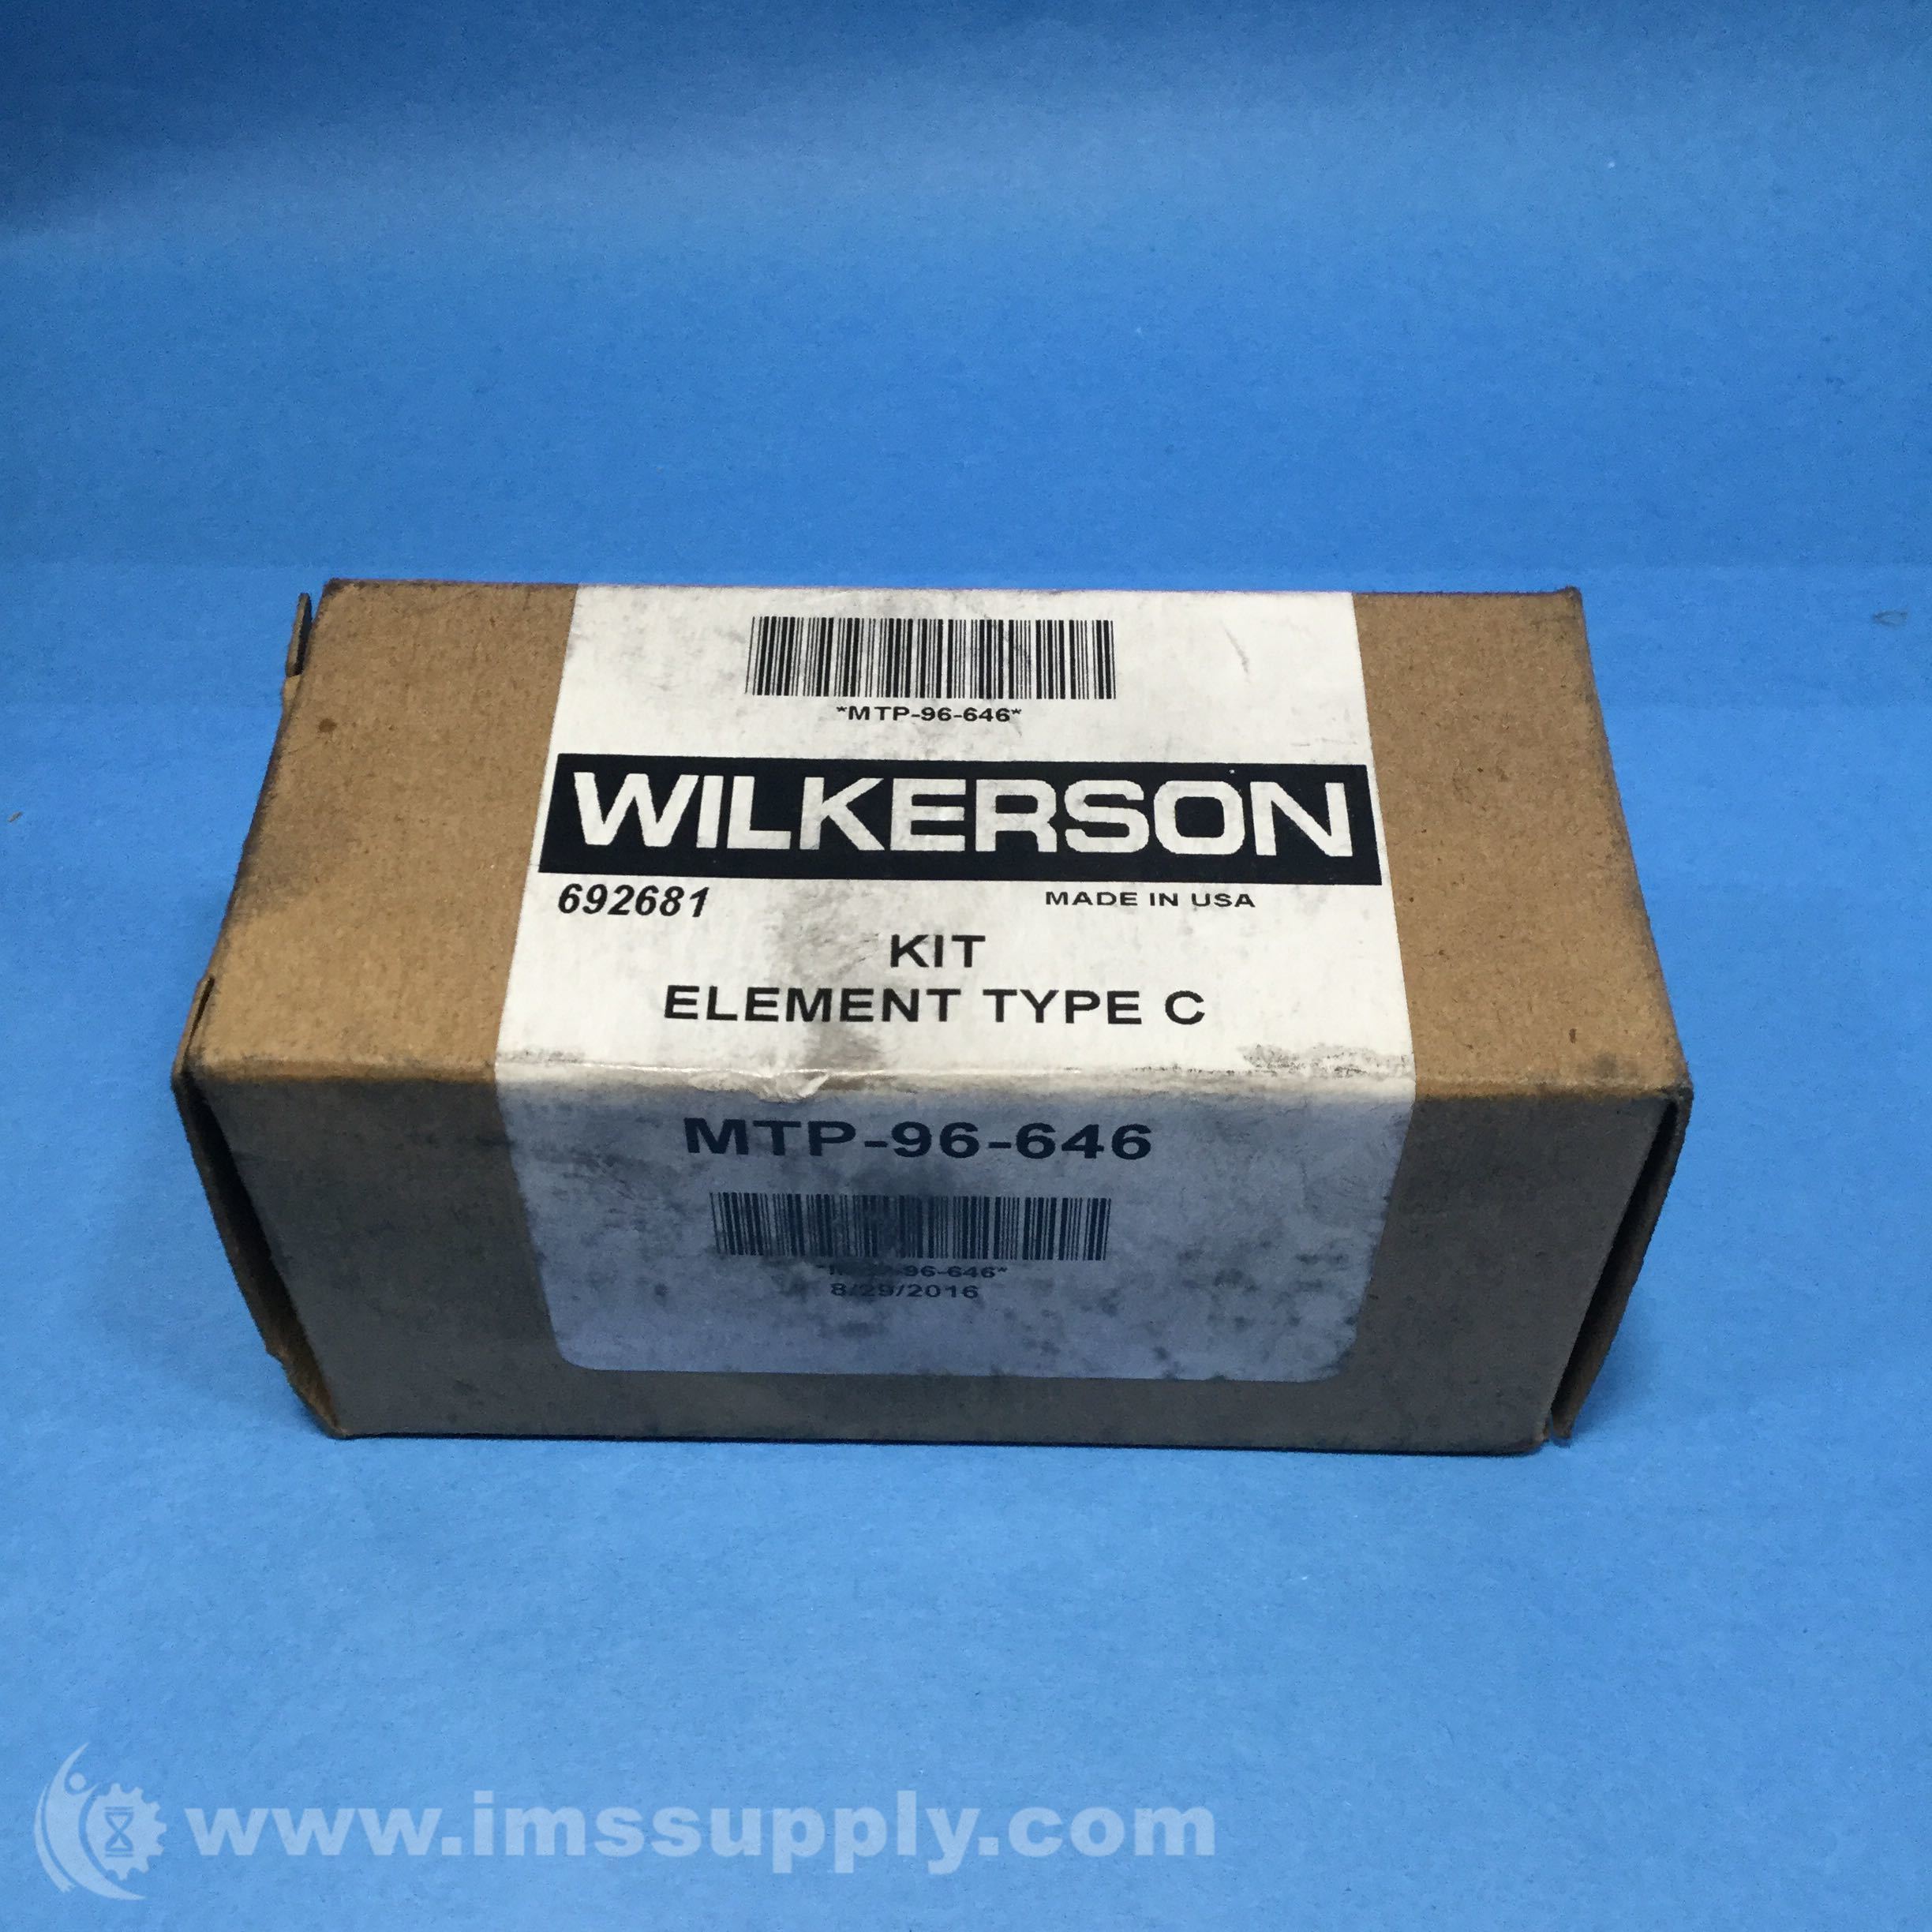 WILKERSON MTP-96-646 ITEM 010758-A2-3 